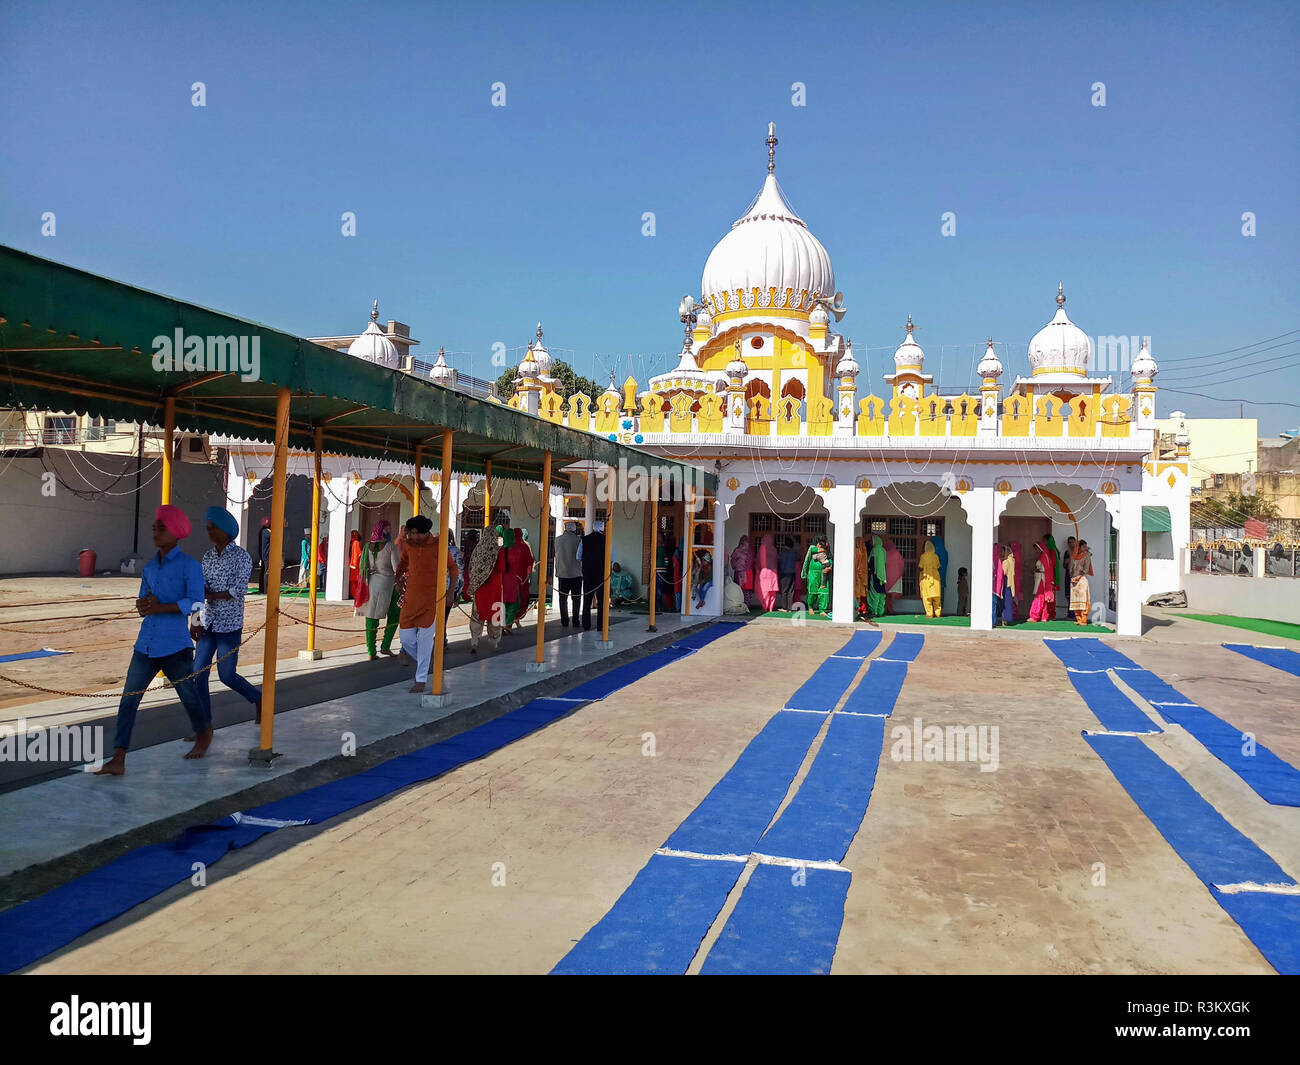 Devotees are seen paying obeisance at the Khanpur Gurduwara during the occasion of the 550th birth anniversary of Guru Nanak Dev in Mohali. Sikhism was founded in the 15th century by Guru Nanak, who broke away from Hinduism, India’s dominant religion, He preached the equality of races and genders and the rejection of image-worship and the caste system. Stock Photo